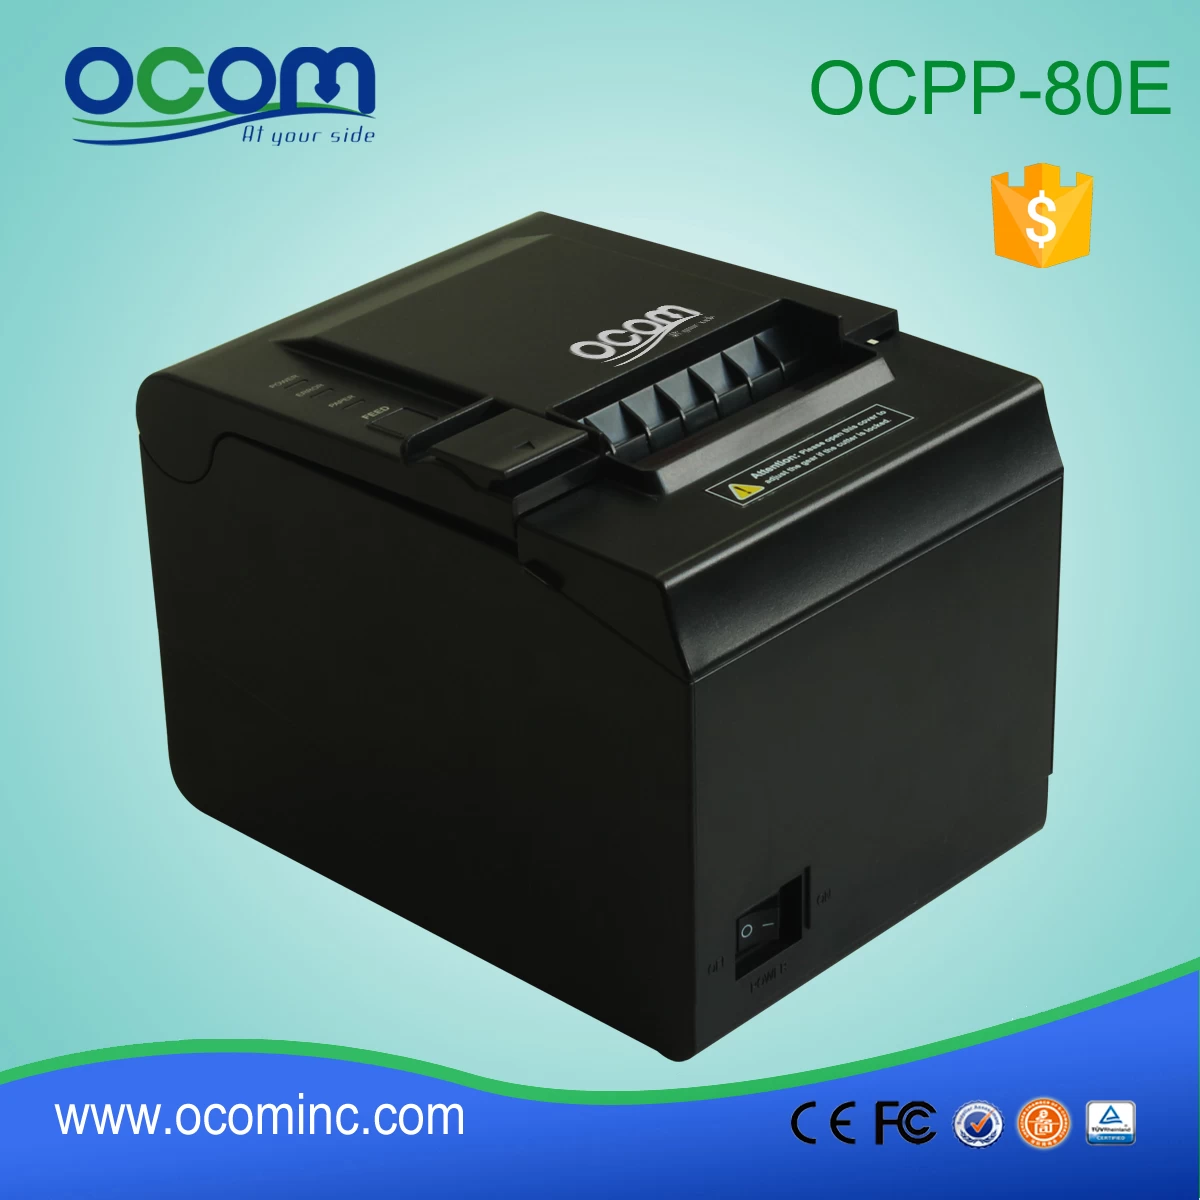 OCPP-80E---China facory made low cost thermal printer